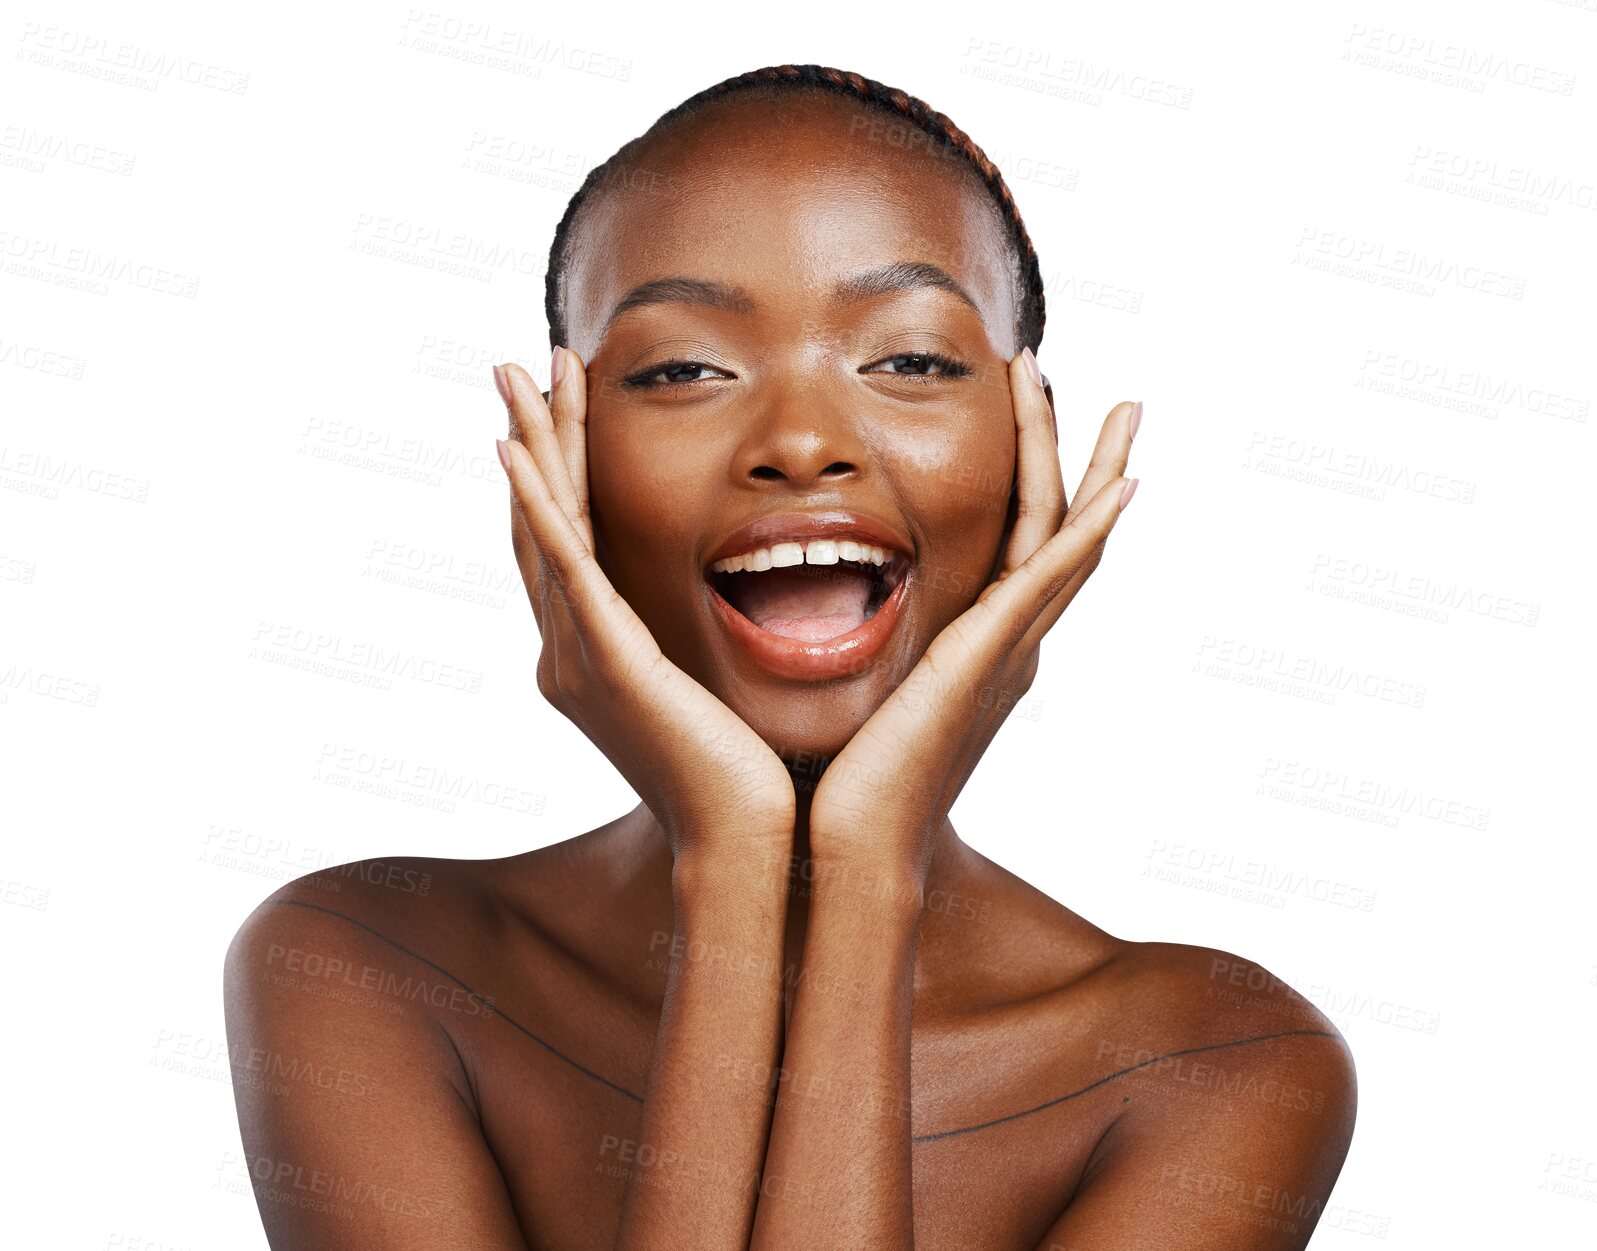 Buy stock photo Skincare, portrait and happy black woman with beauty, cosmetics or results on isolated, transparent or png background. Hands, face and African wellness model with dermatology, shine or glowing skin